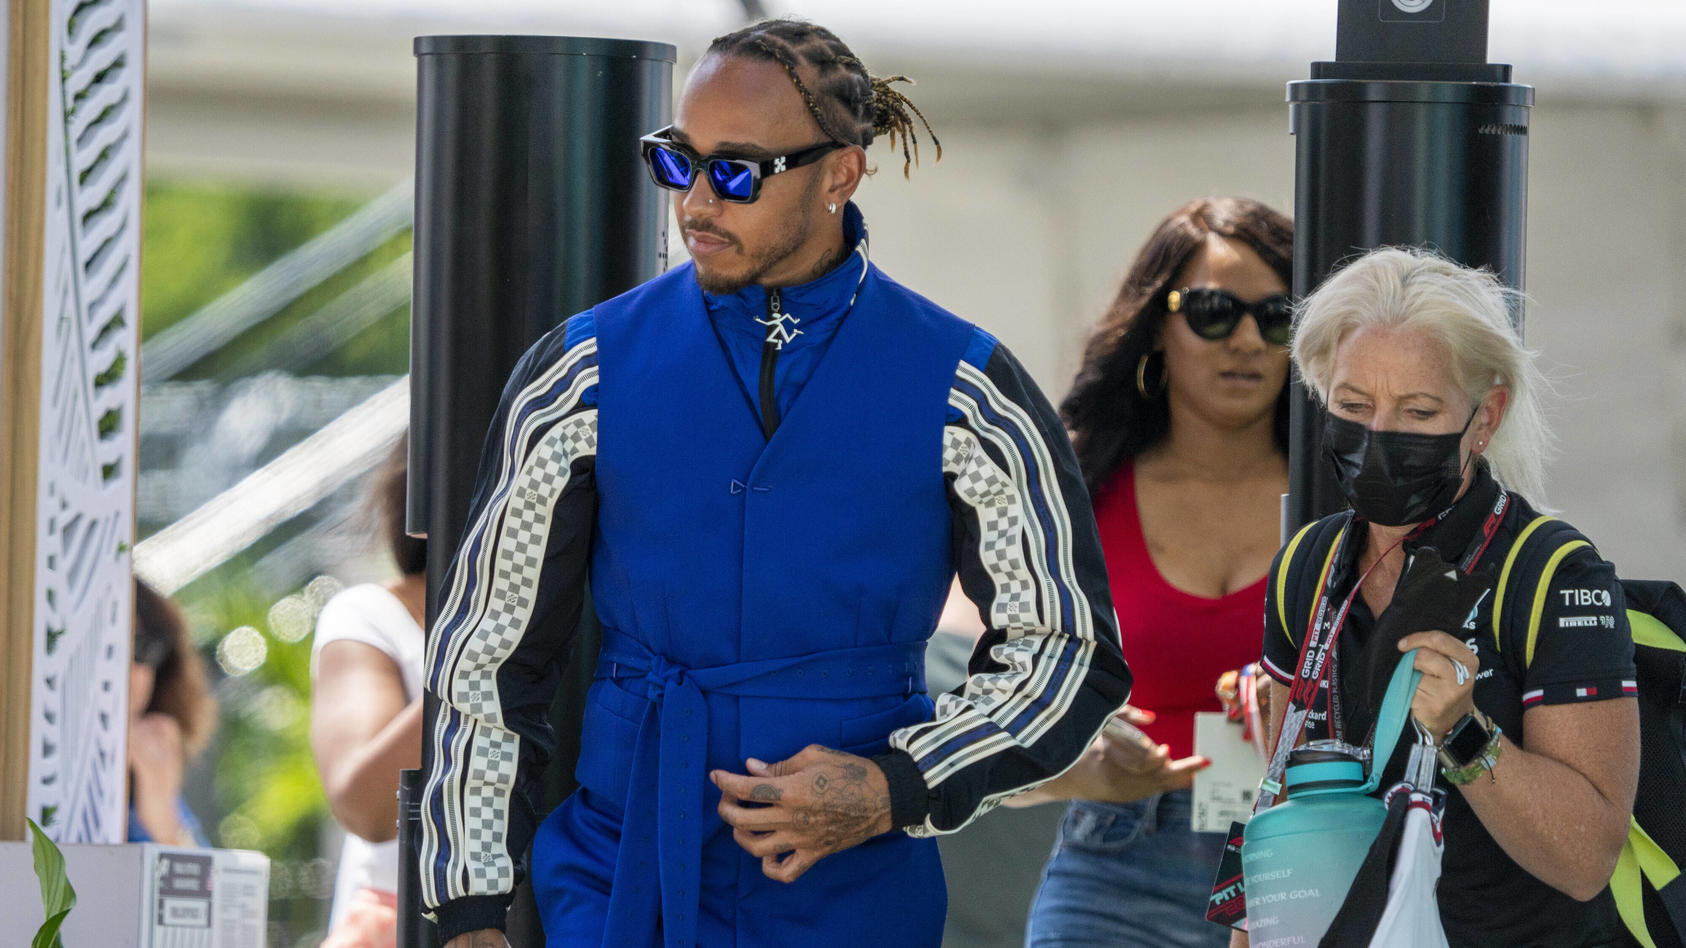  British Formula One driver Lewis Hamilton of Mercedes-AMG Petronas F1 Team and his physiotherapist and assistant Angela Cullen arrive in the paddock during the Formula One Grand Prix of Miami at the Miami International Autodrome in Miami, Florida on